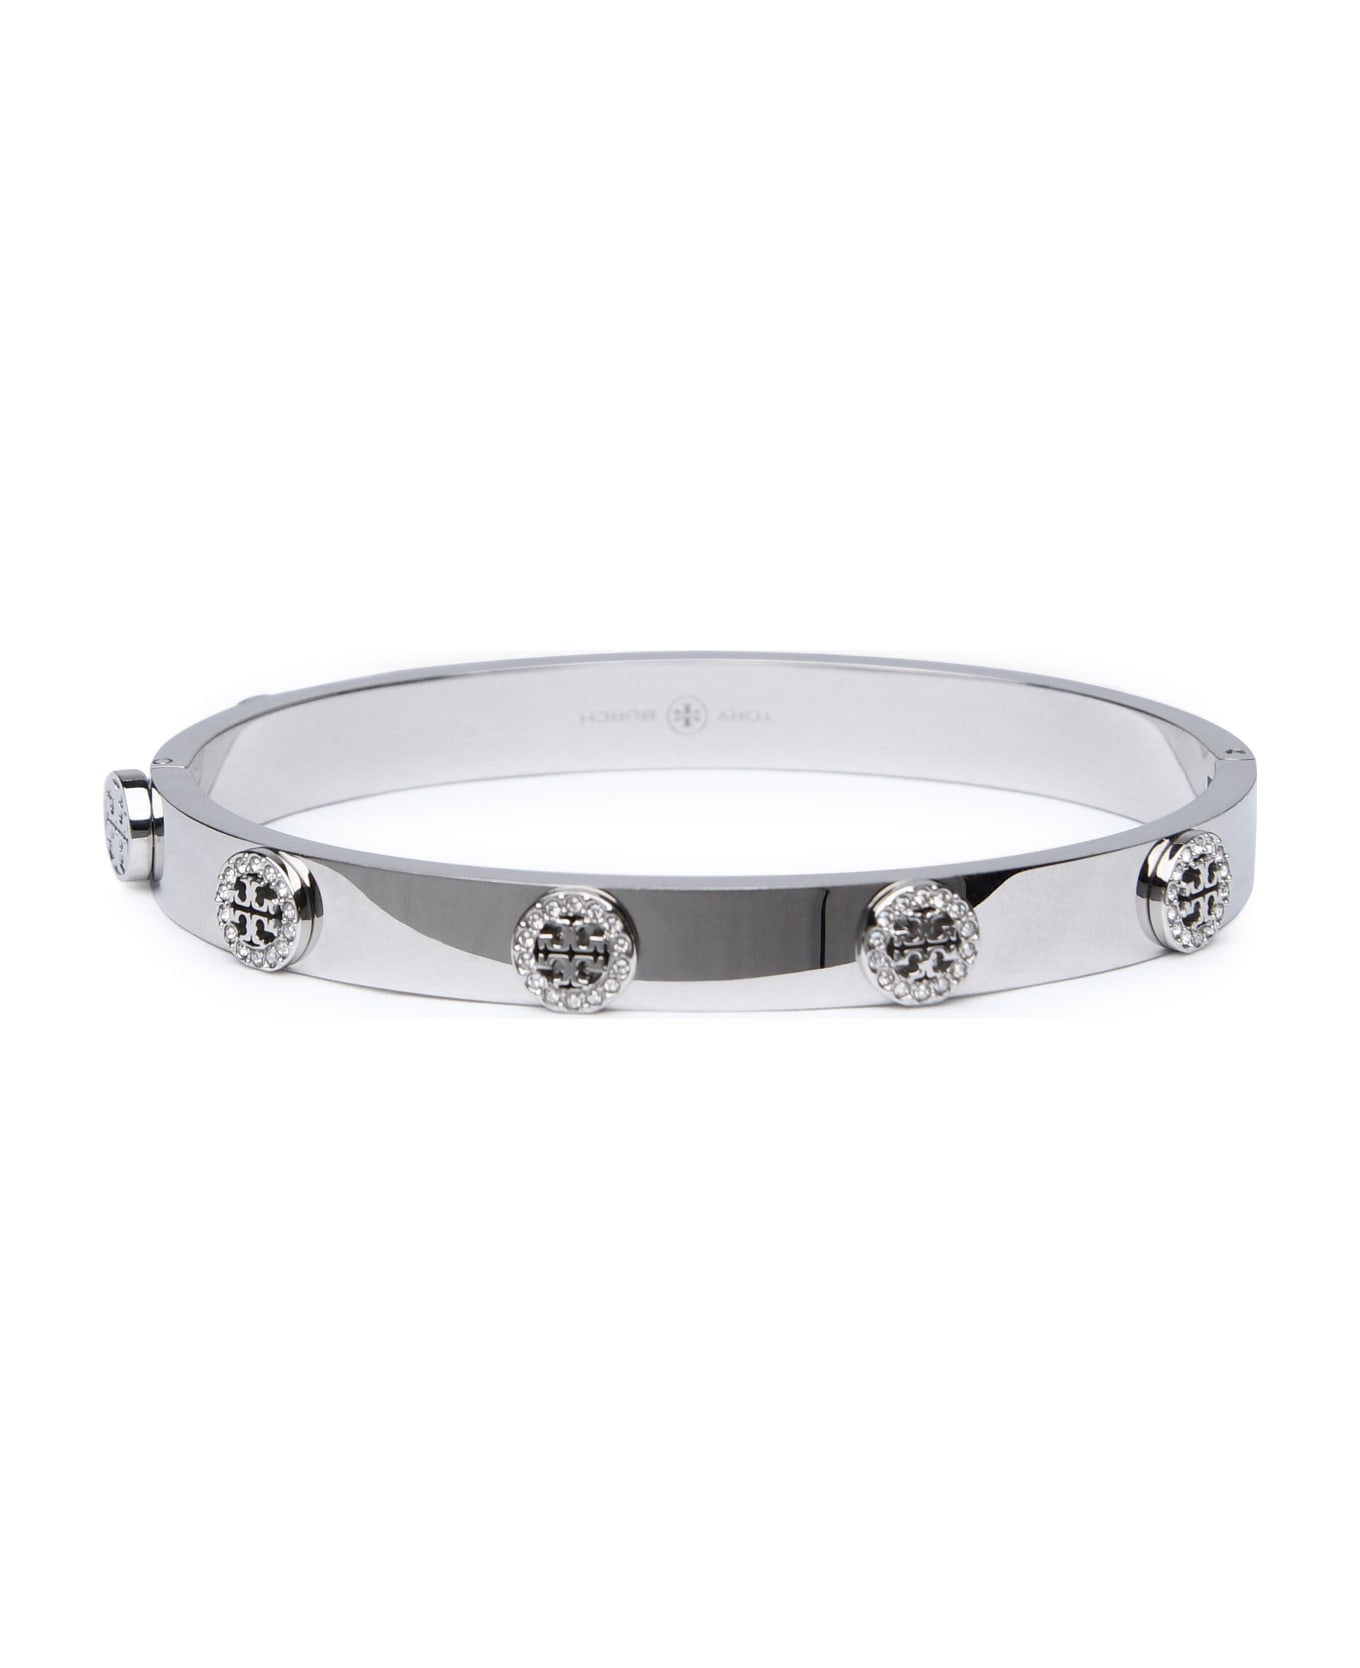 Tory Burch Miller Stud Pave Bracelet - Silver ブレスレット